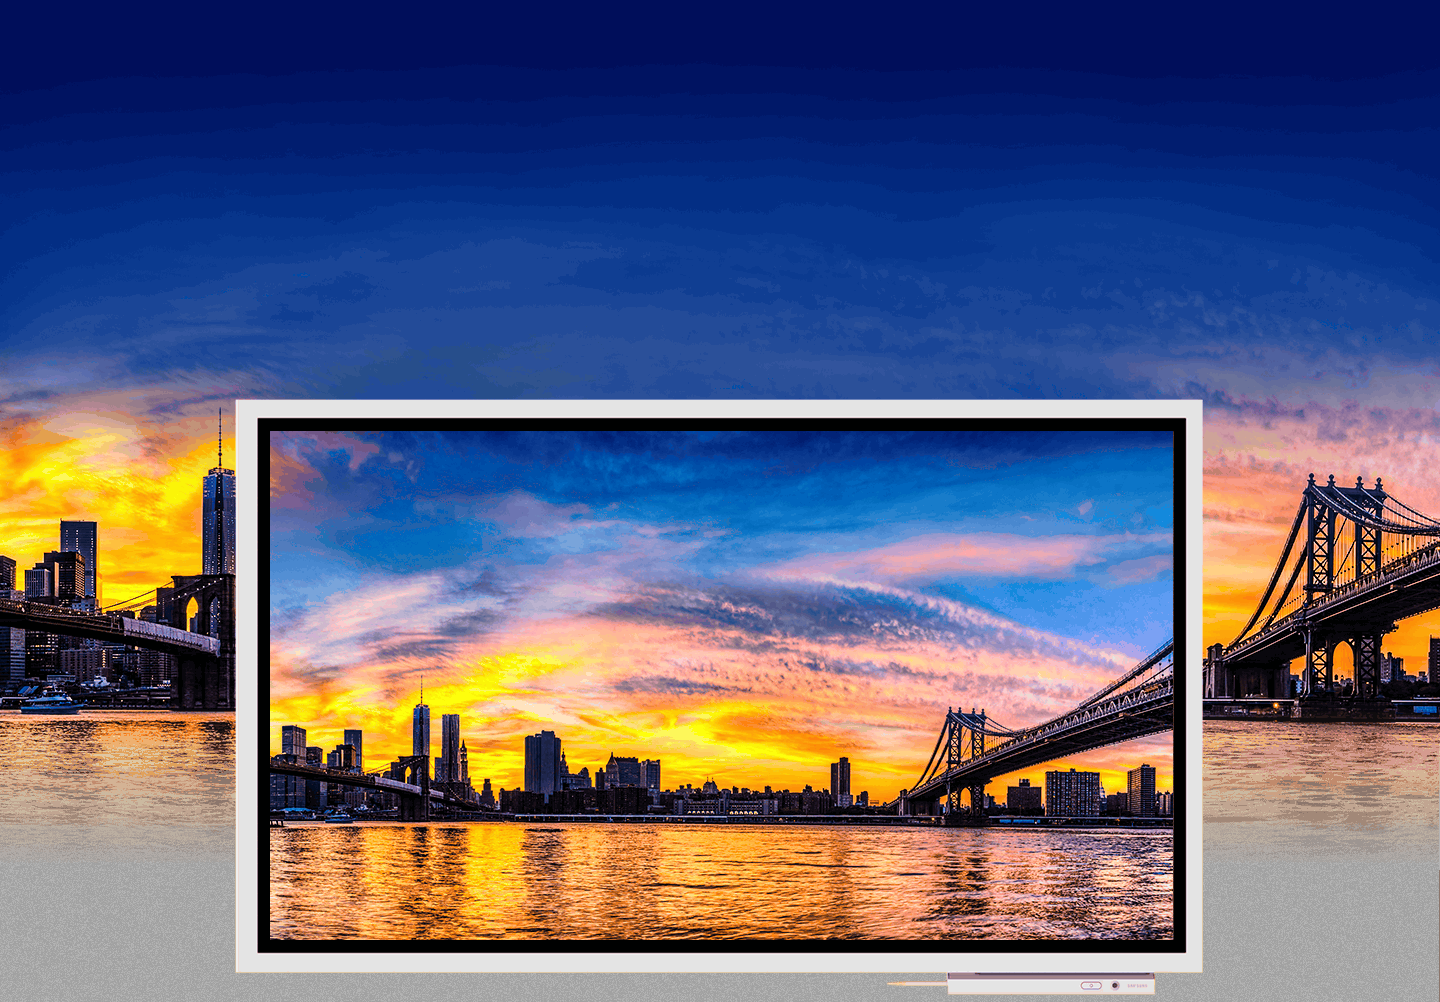 An image showing a city sunset shown on a Samsung Flip device